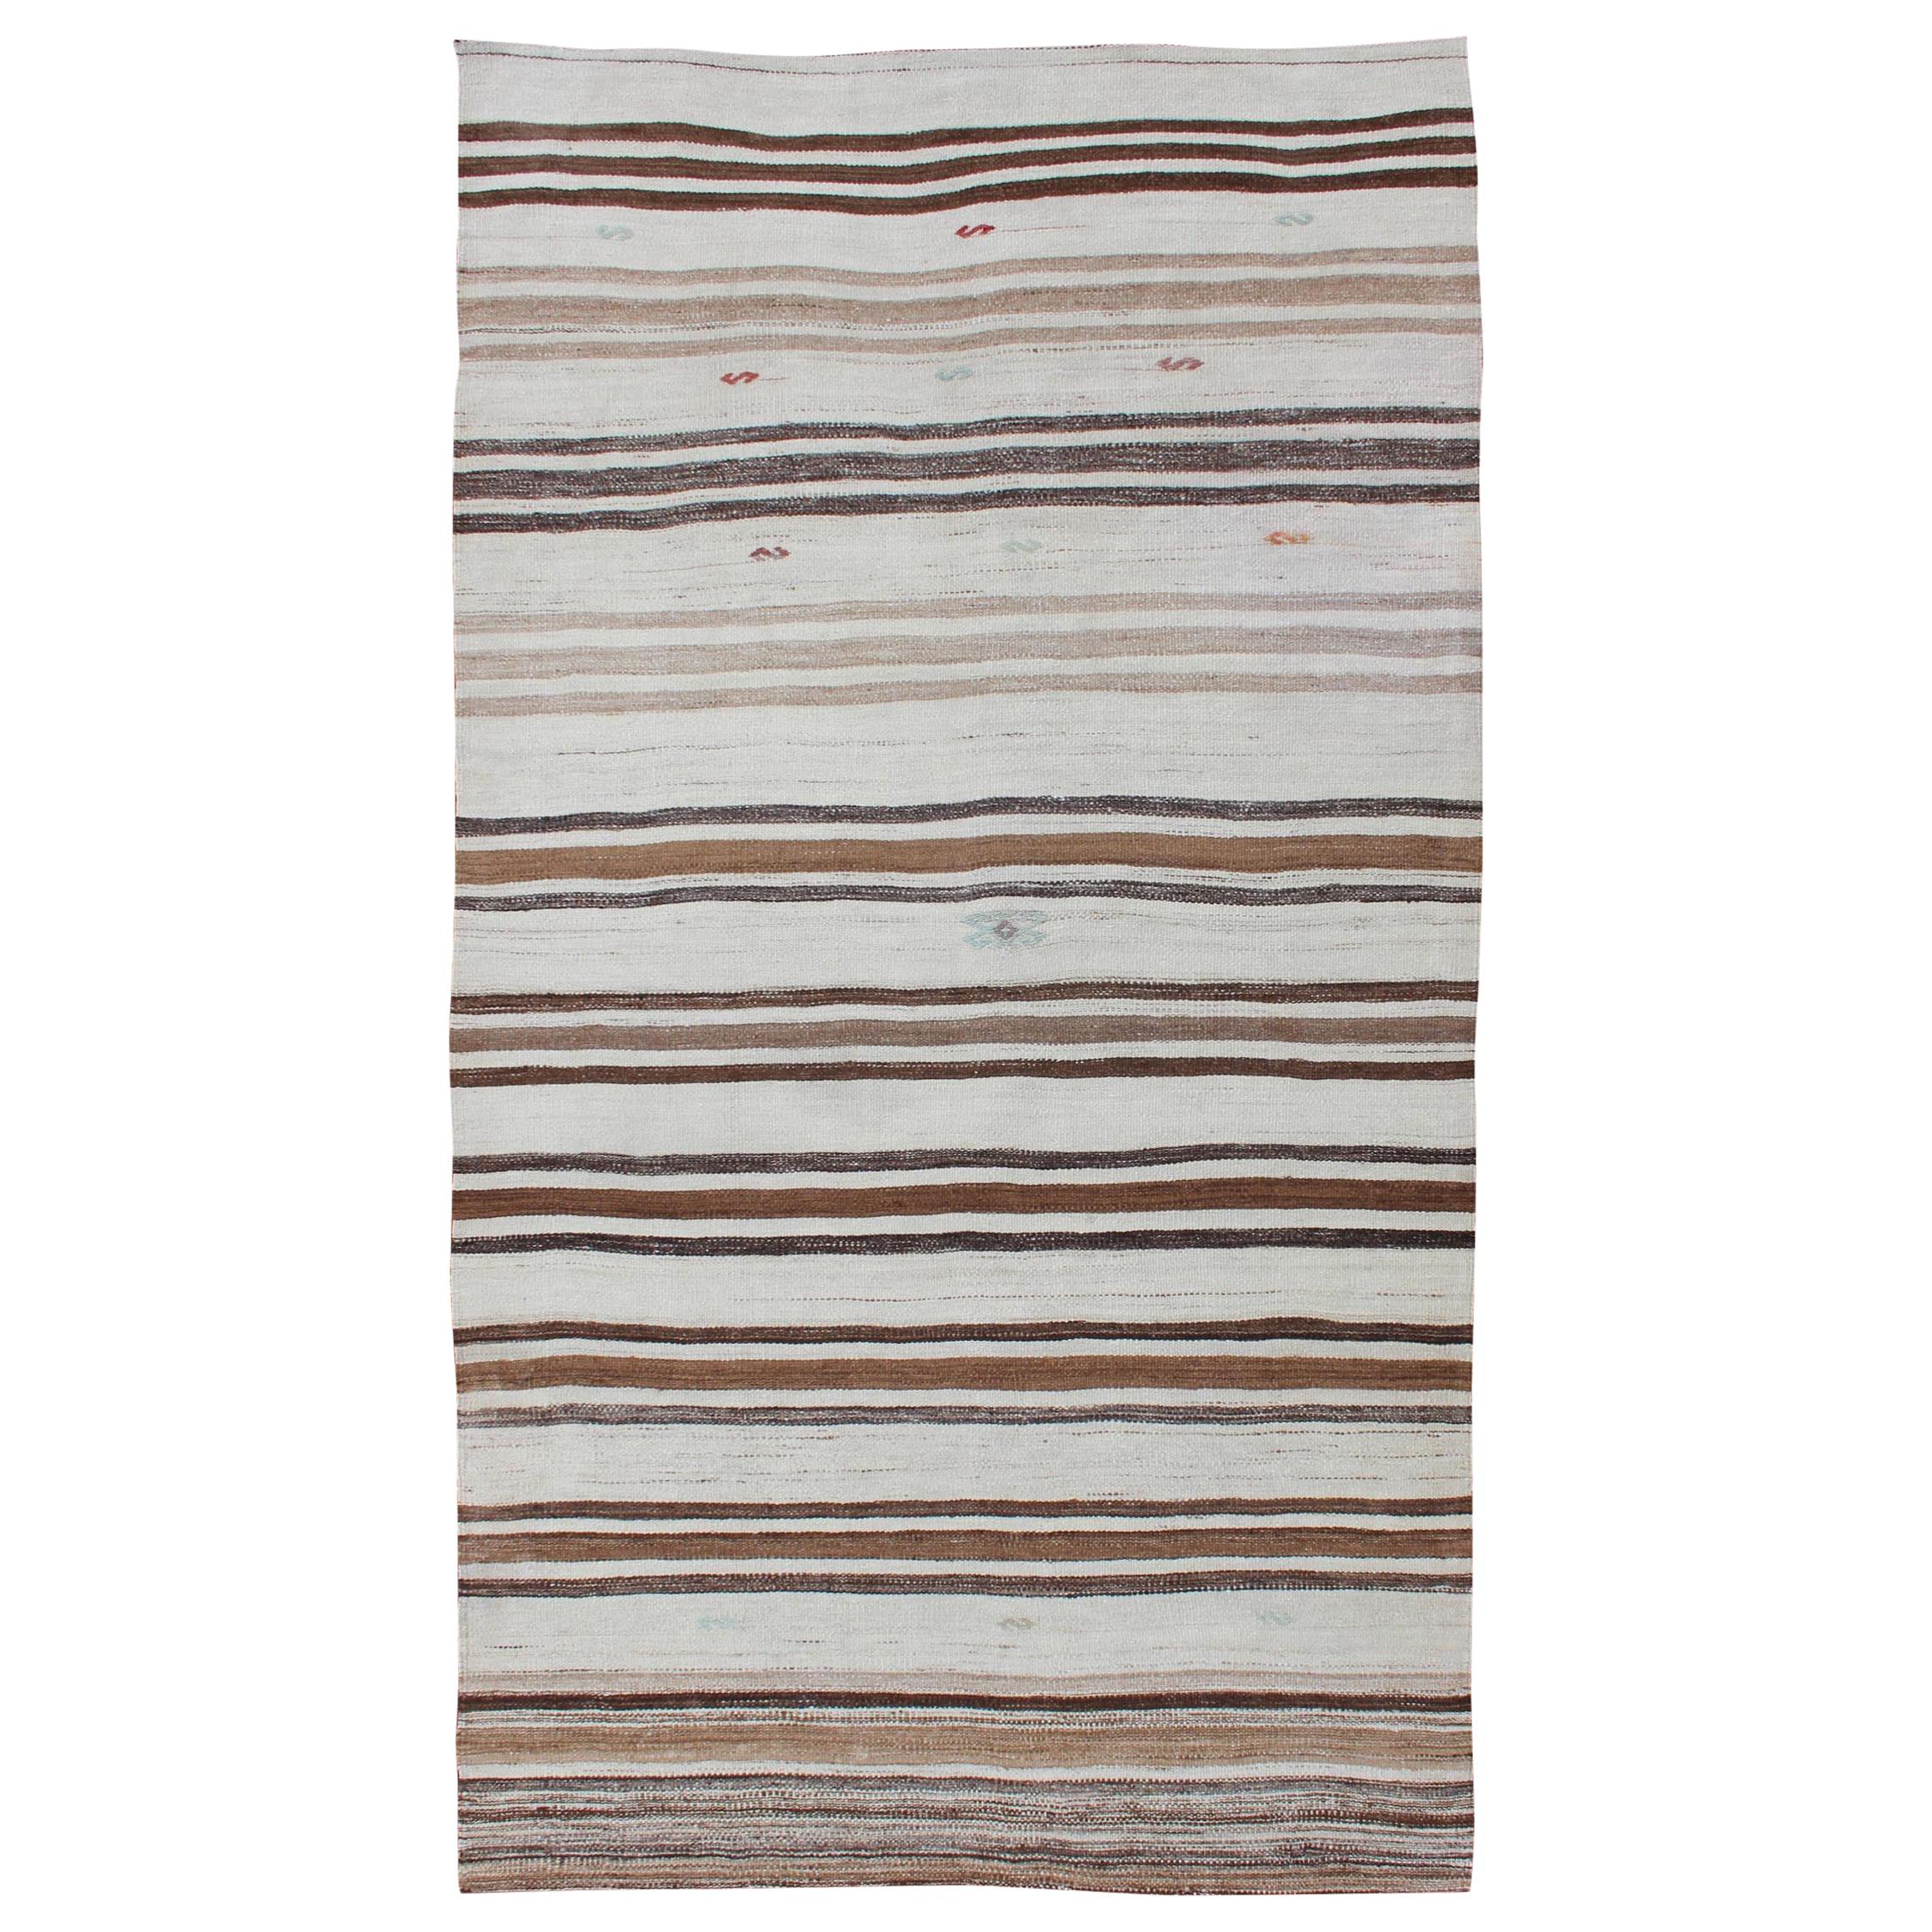 Striped Turkish Vintage Kilim Flat-Weave Rug in Shades of Browns Taupe and Ivory